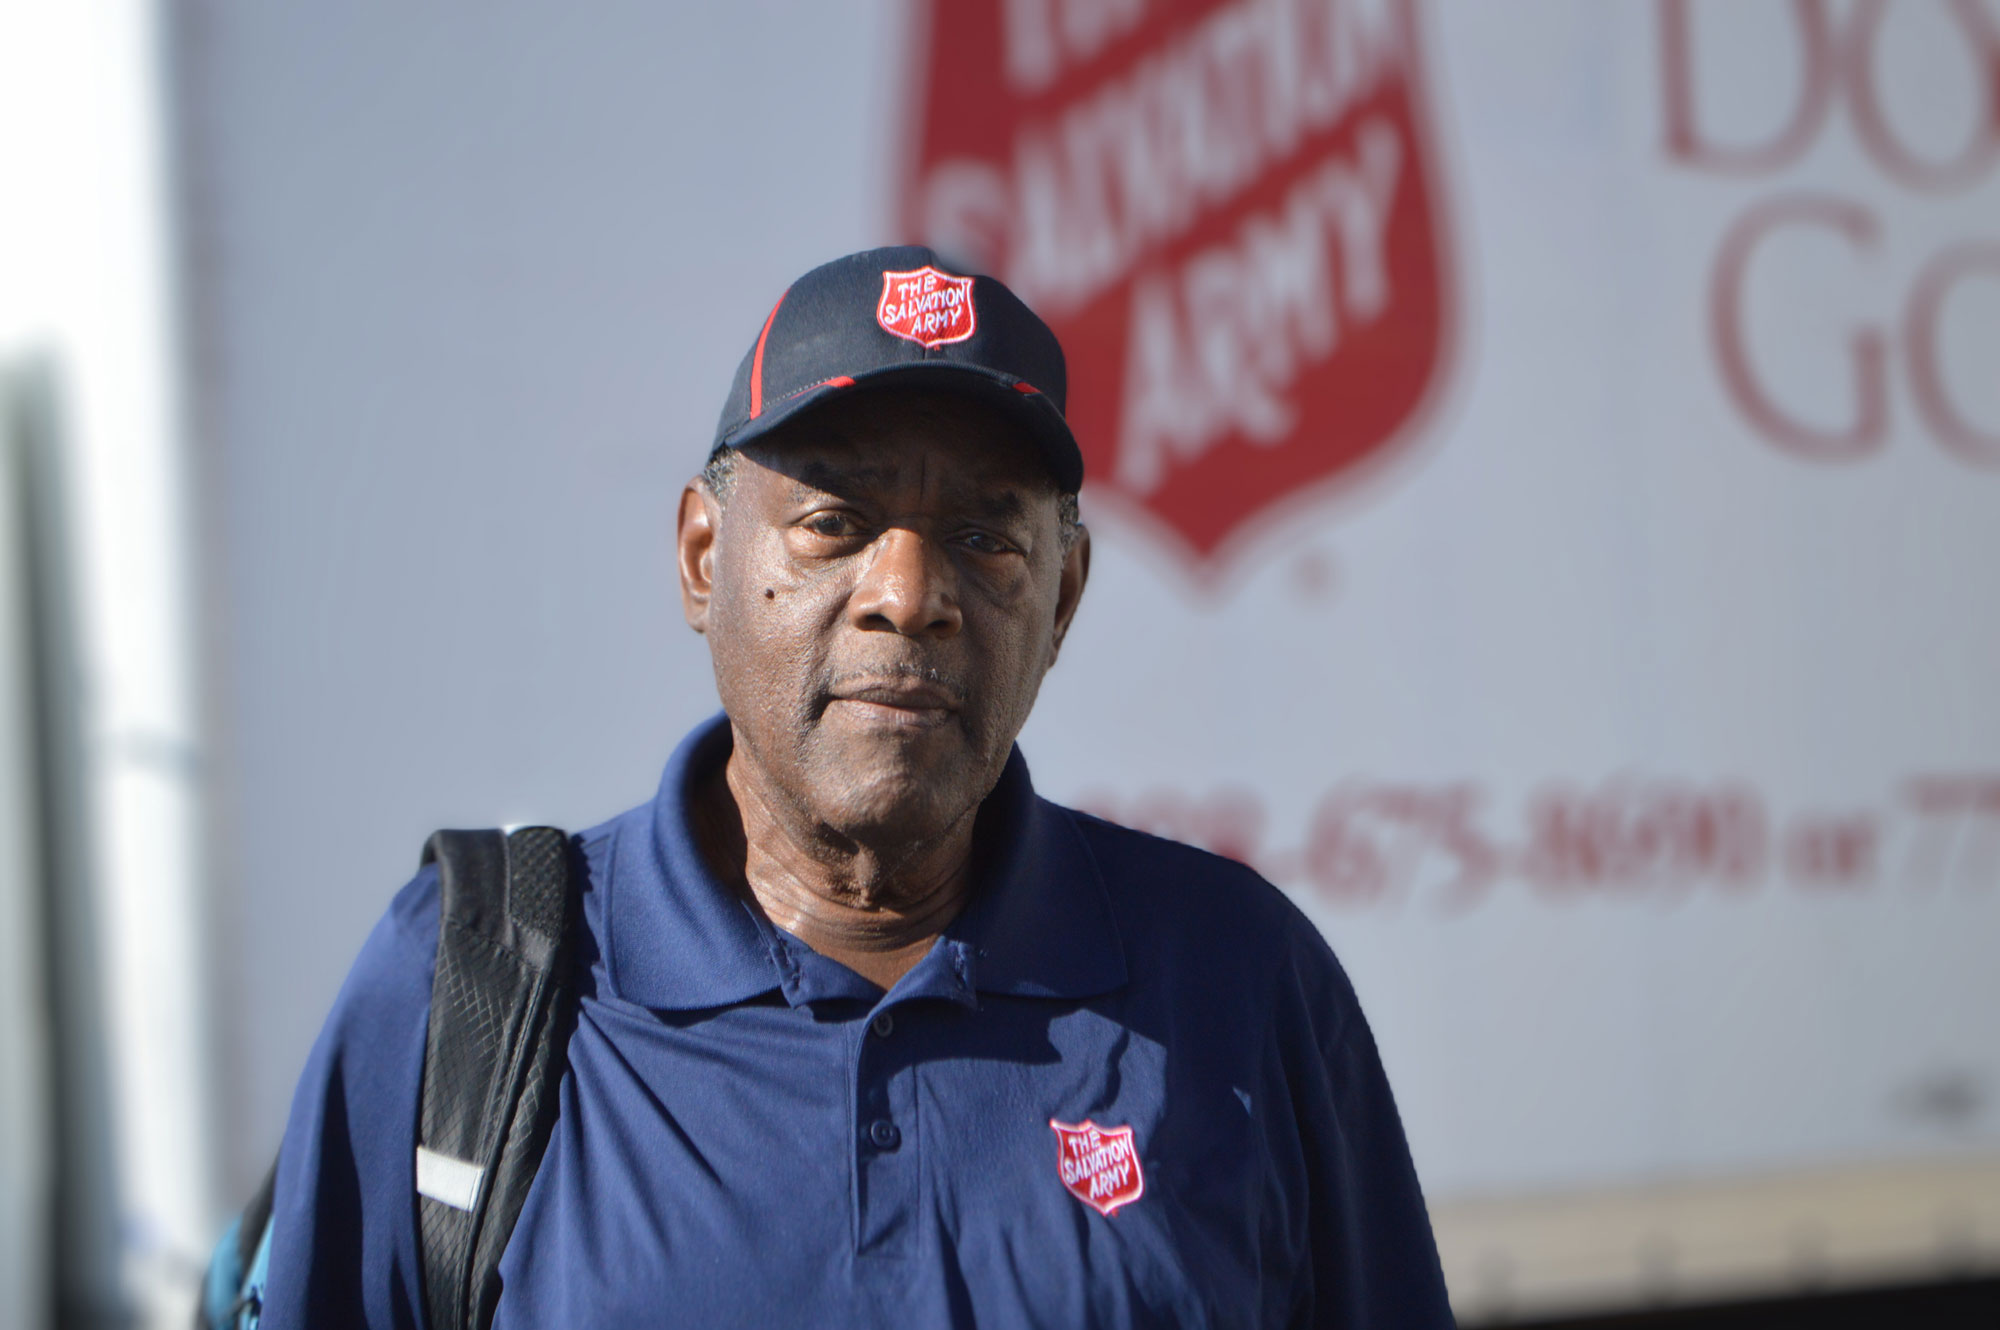 How one man gives and receives as a driver for The Salvation Army